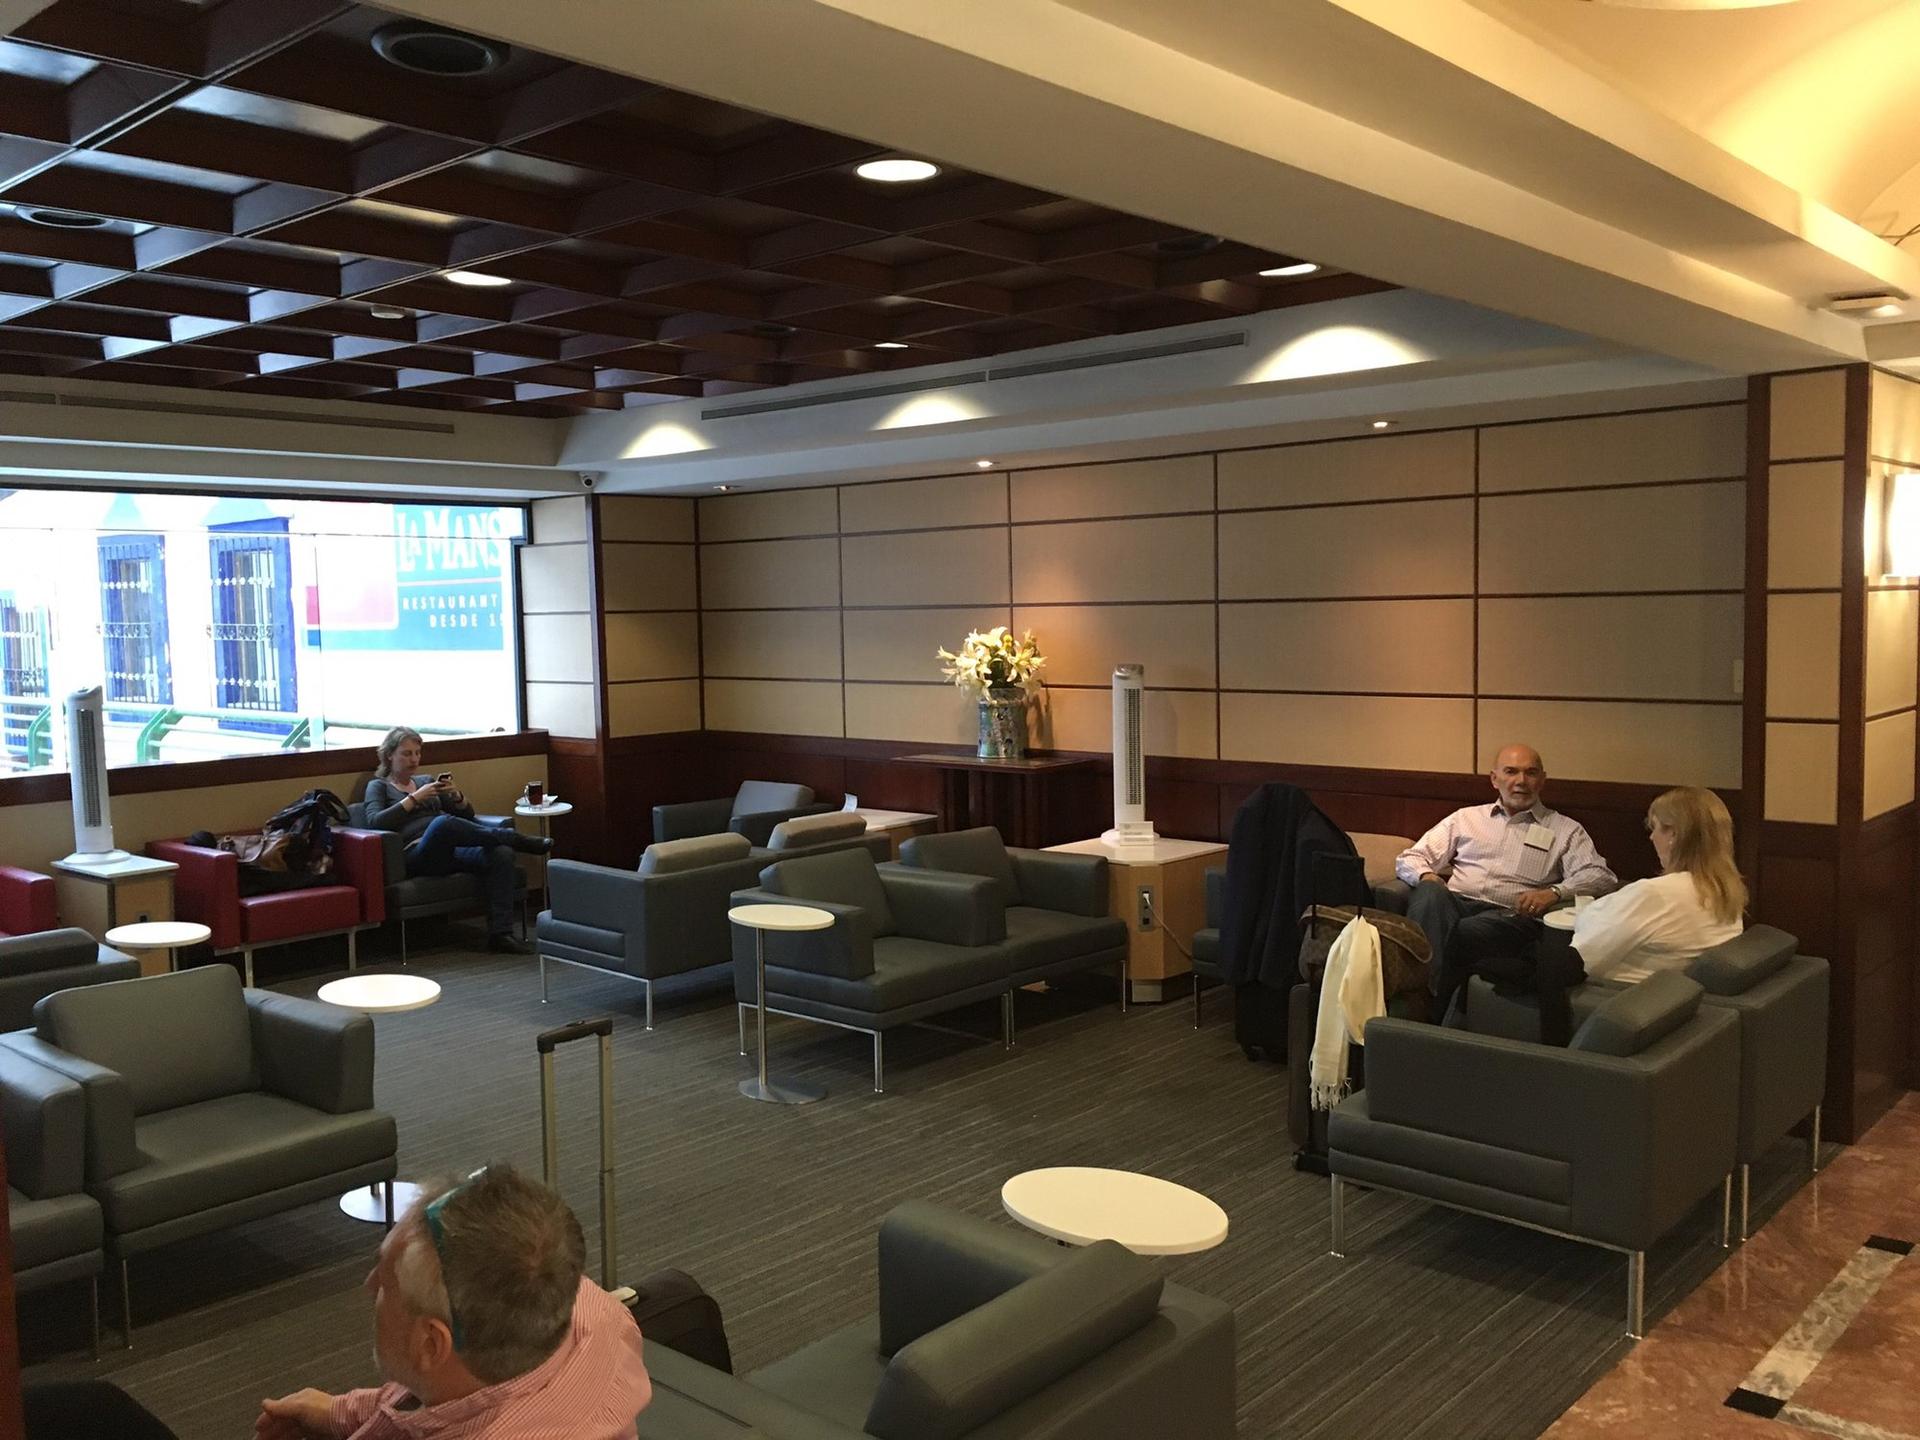 American Airlines Admirals Club image 14 of 32